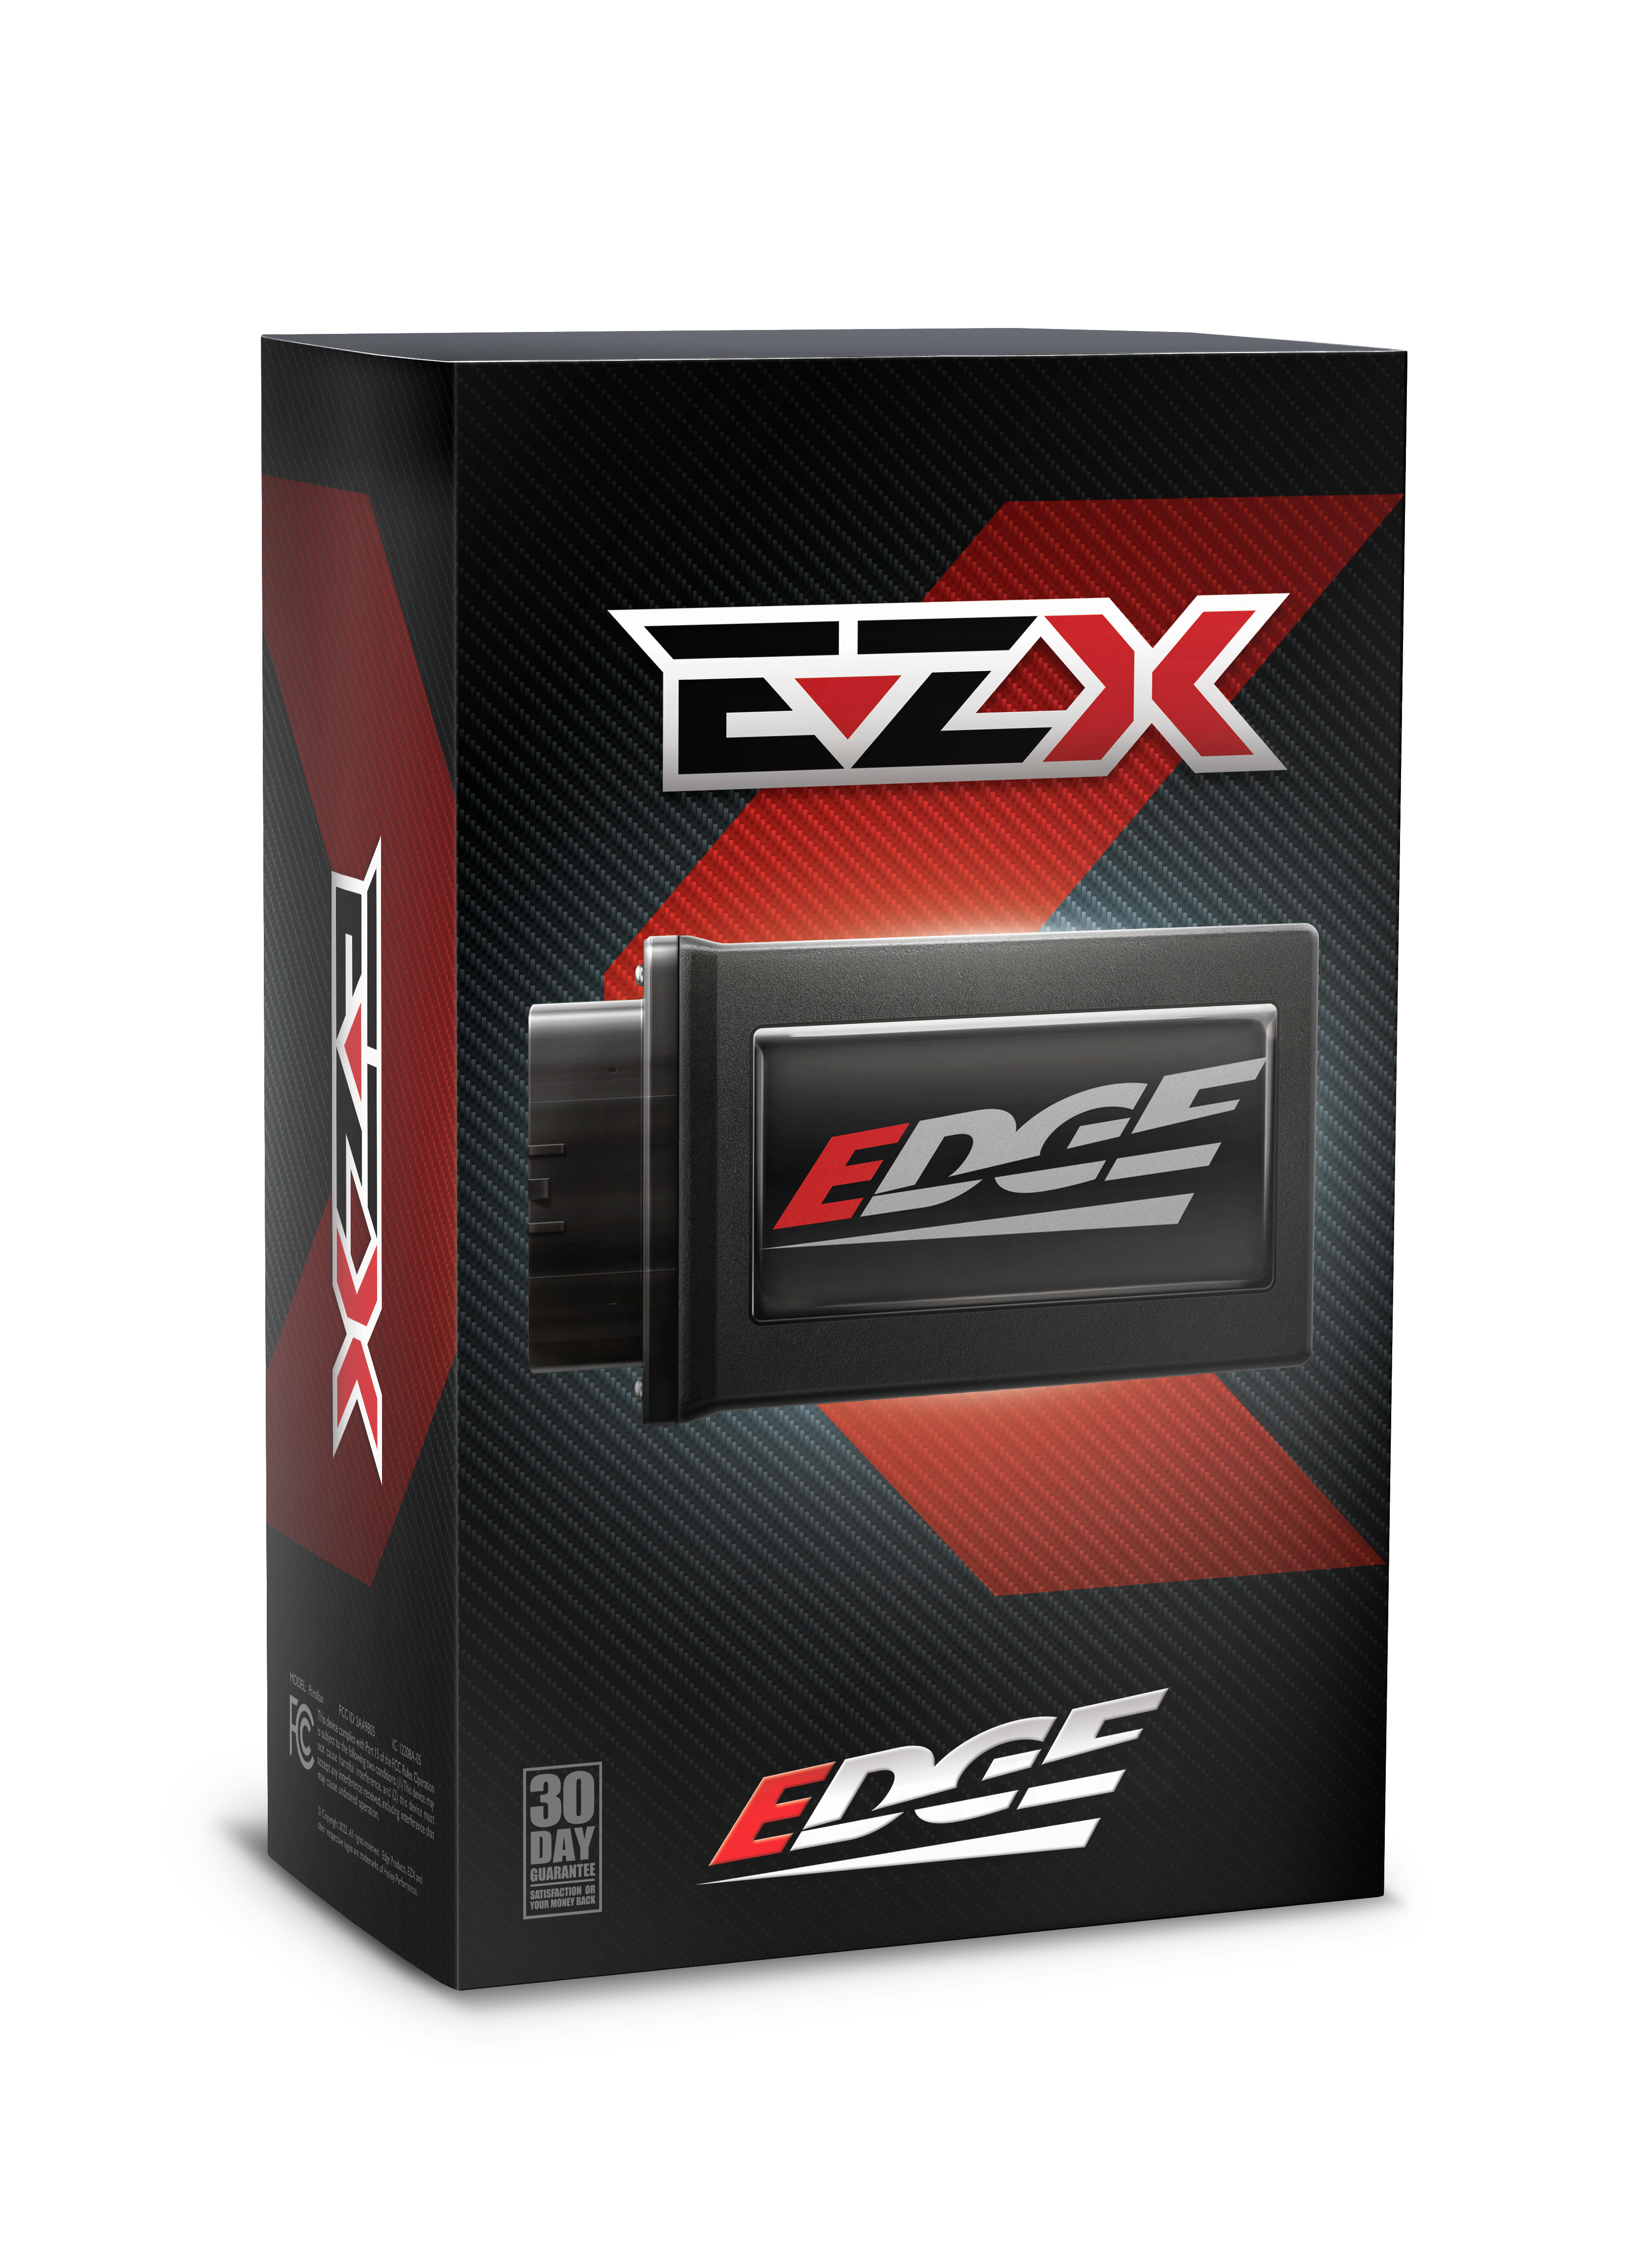 Edge Products EZX Plus CTS3 for 2019-2022 Ram 6.7L Cummins  EZX CTS3 Package 33710-3